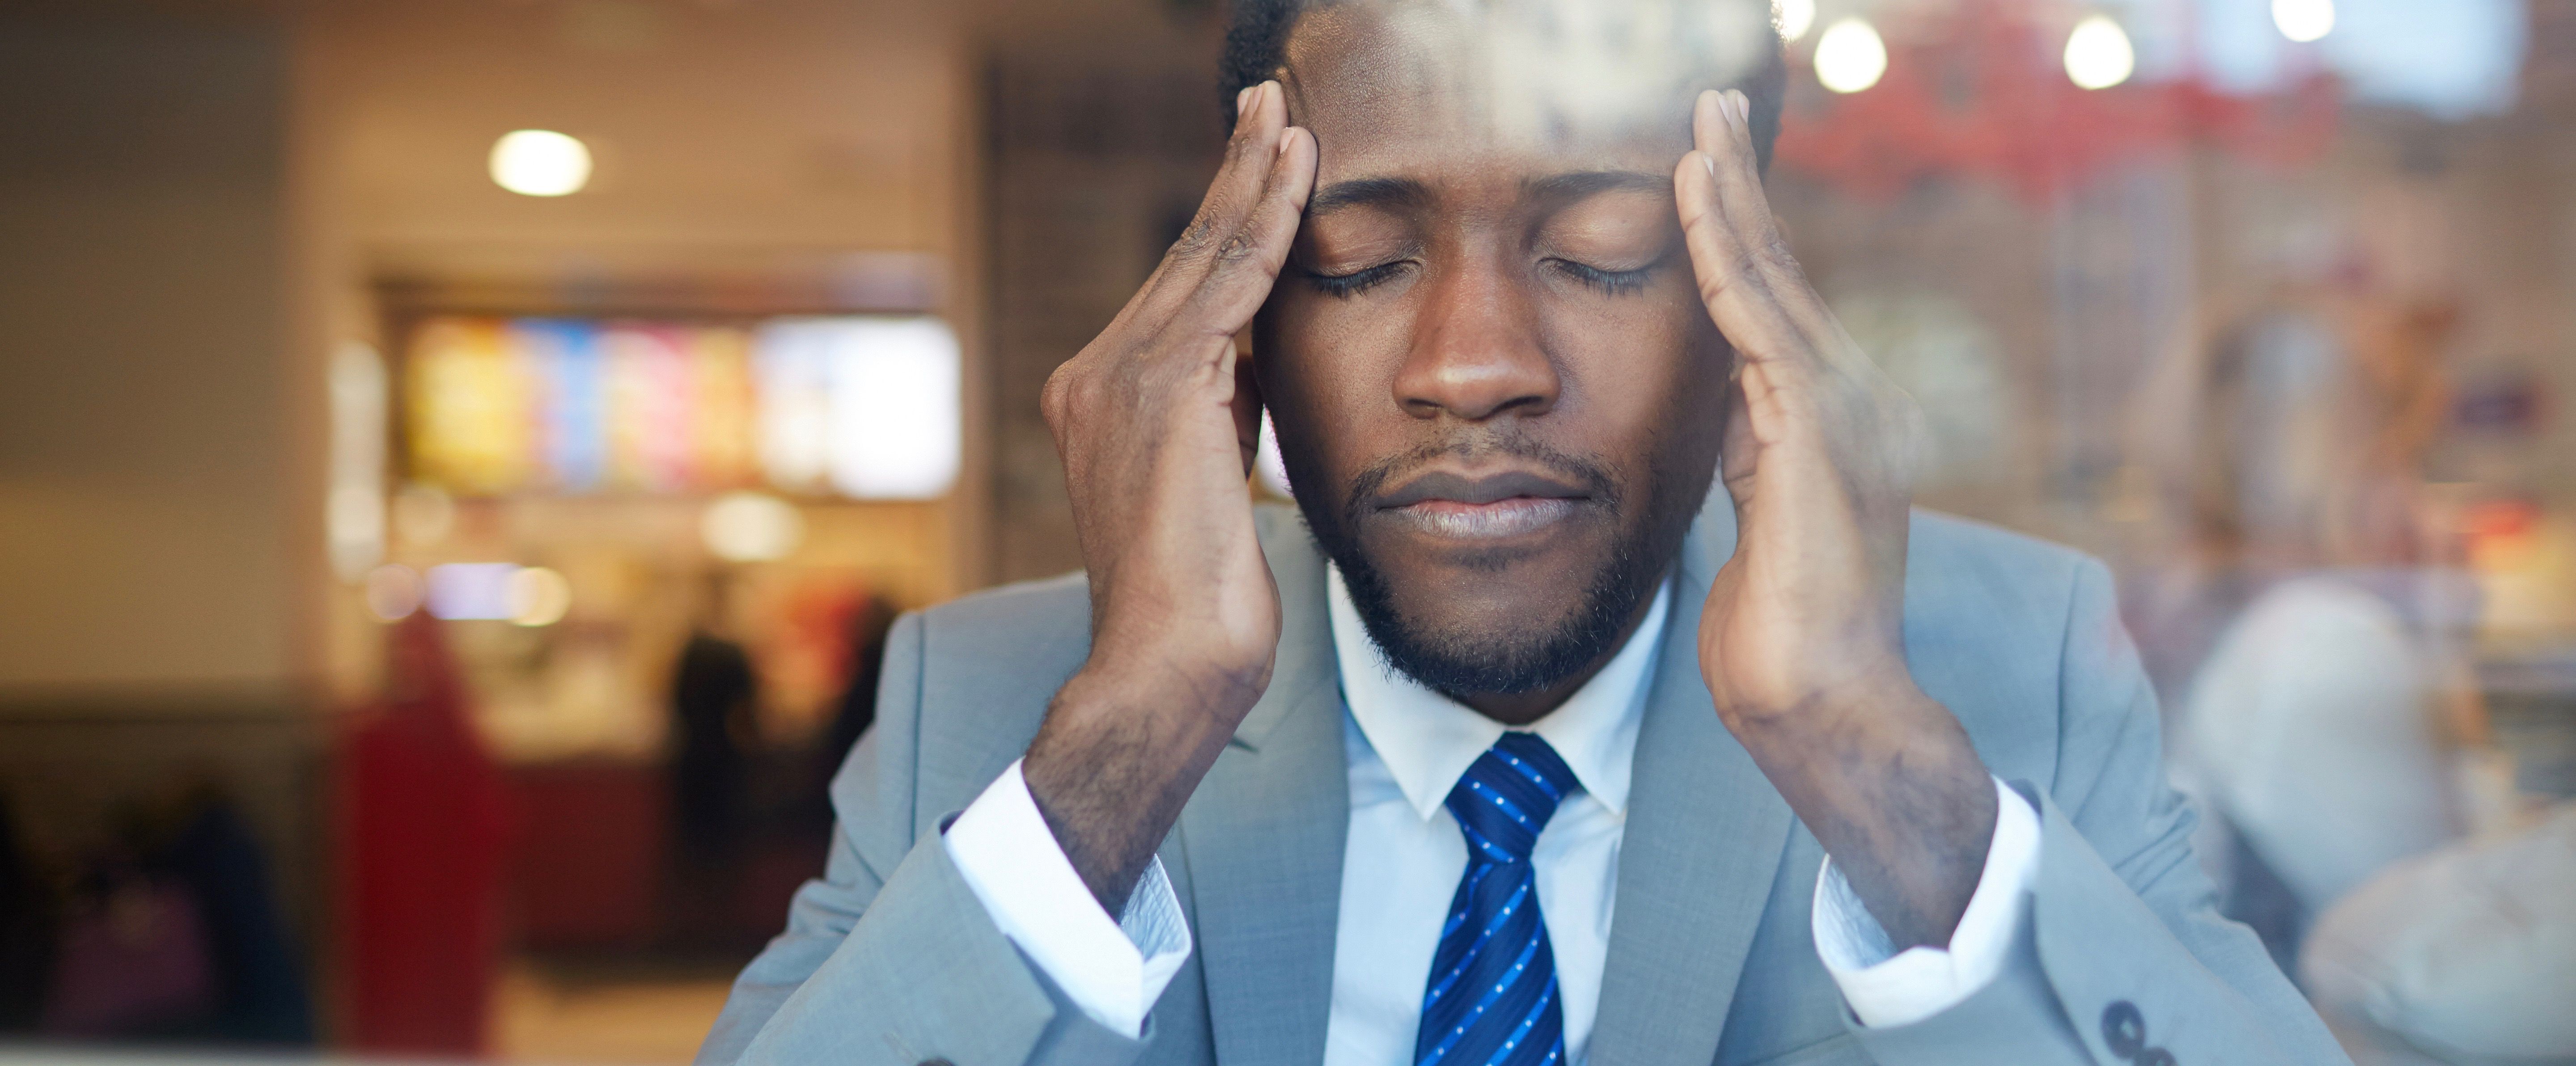 How to Avoid Burnout at Work: 7 Strategies from HubSpot’s Manager of Culture